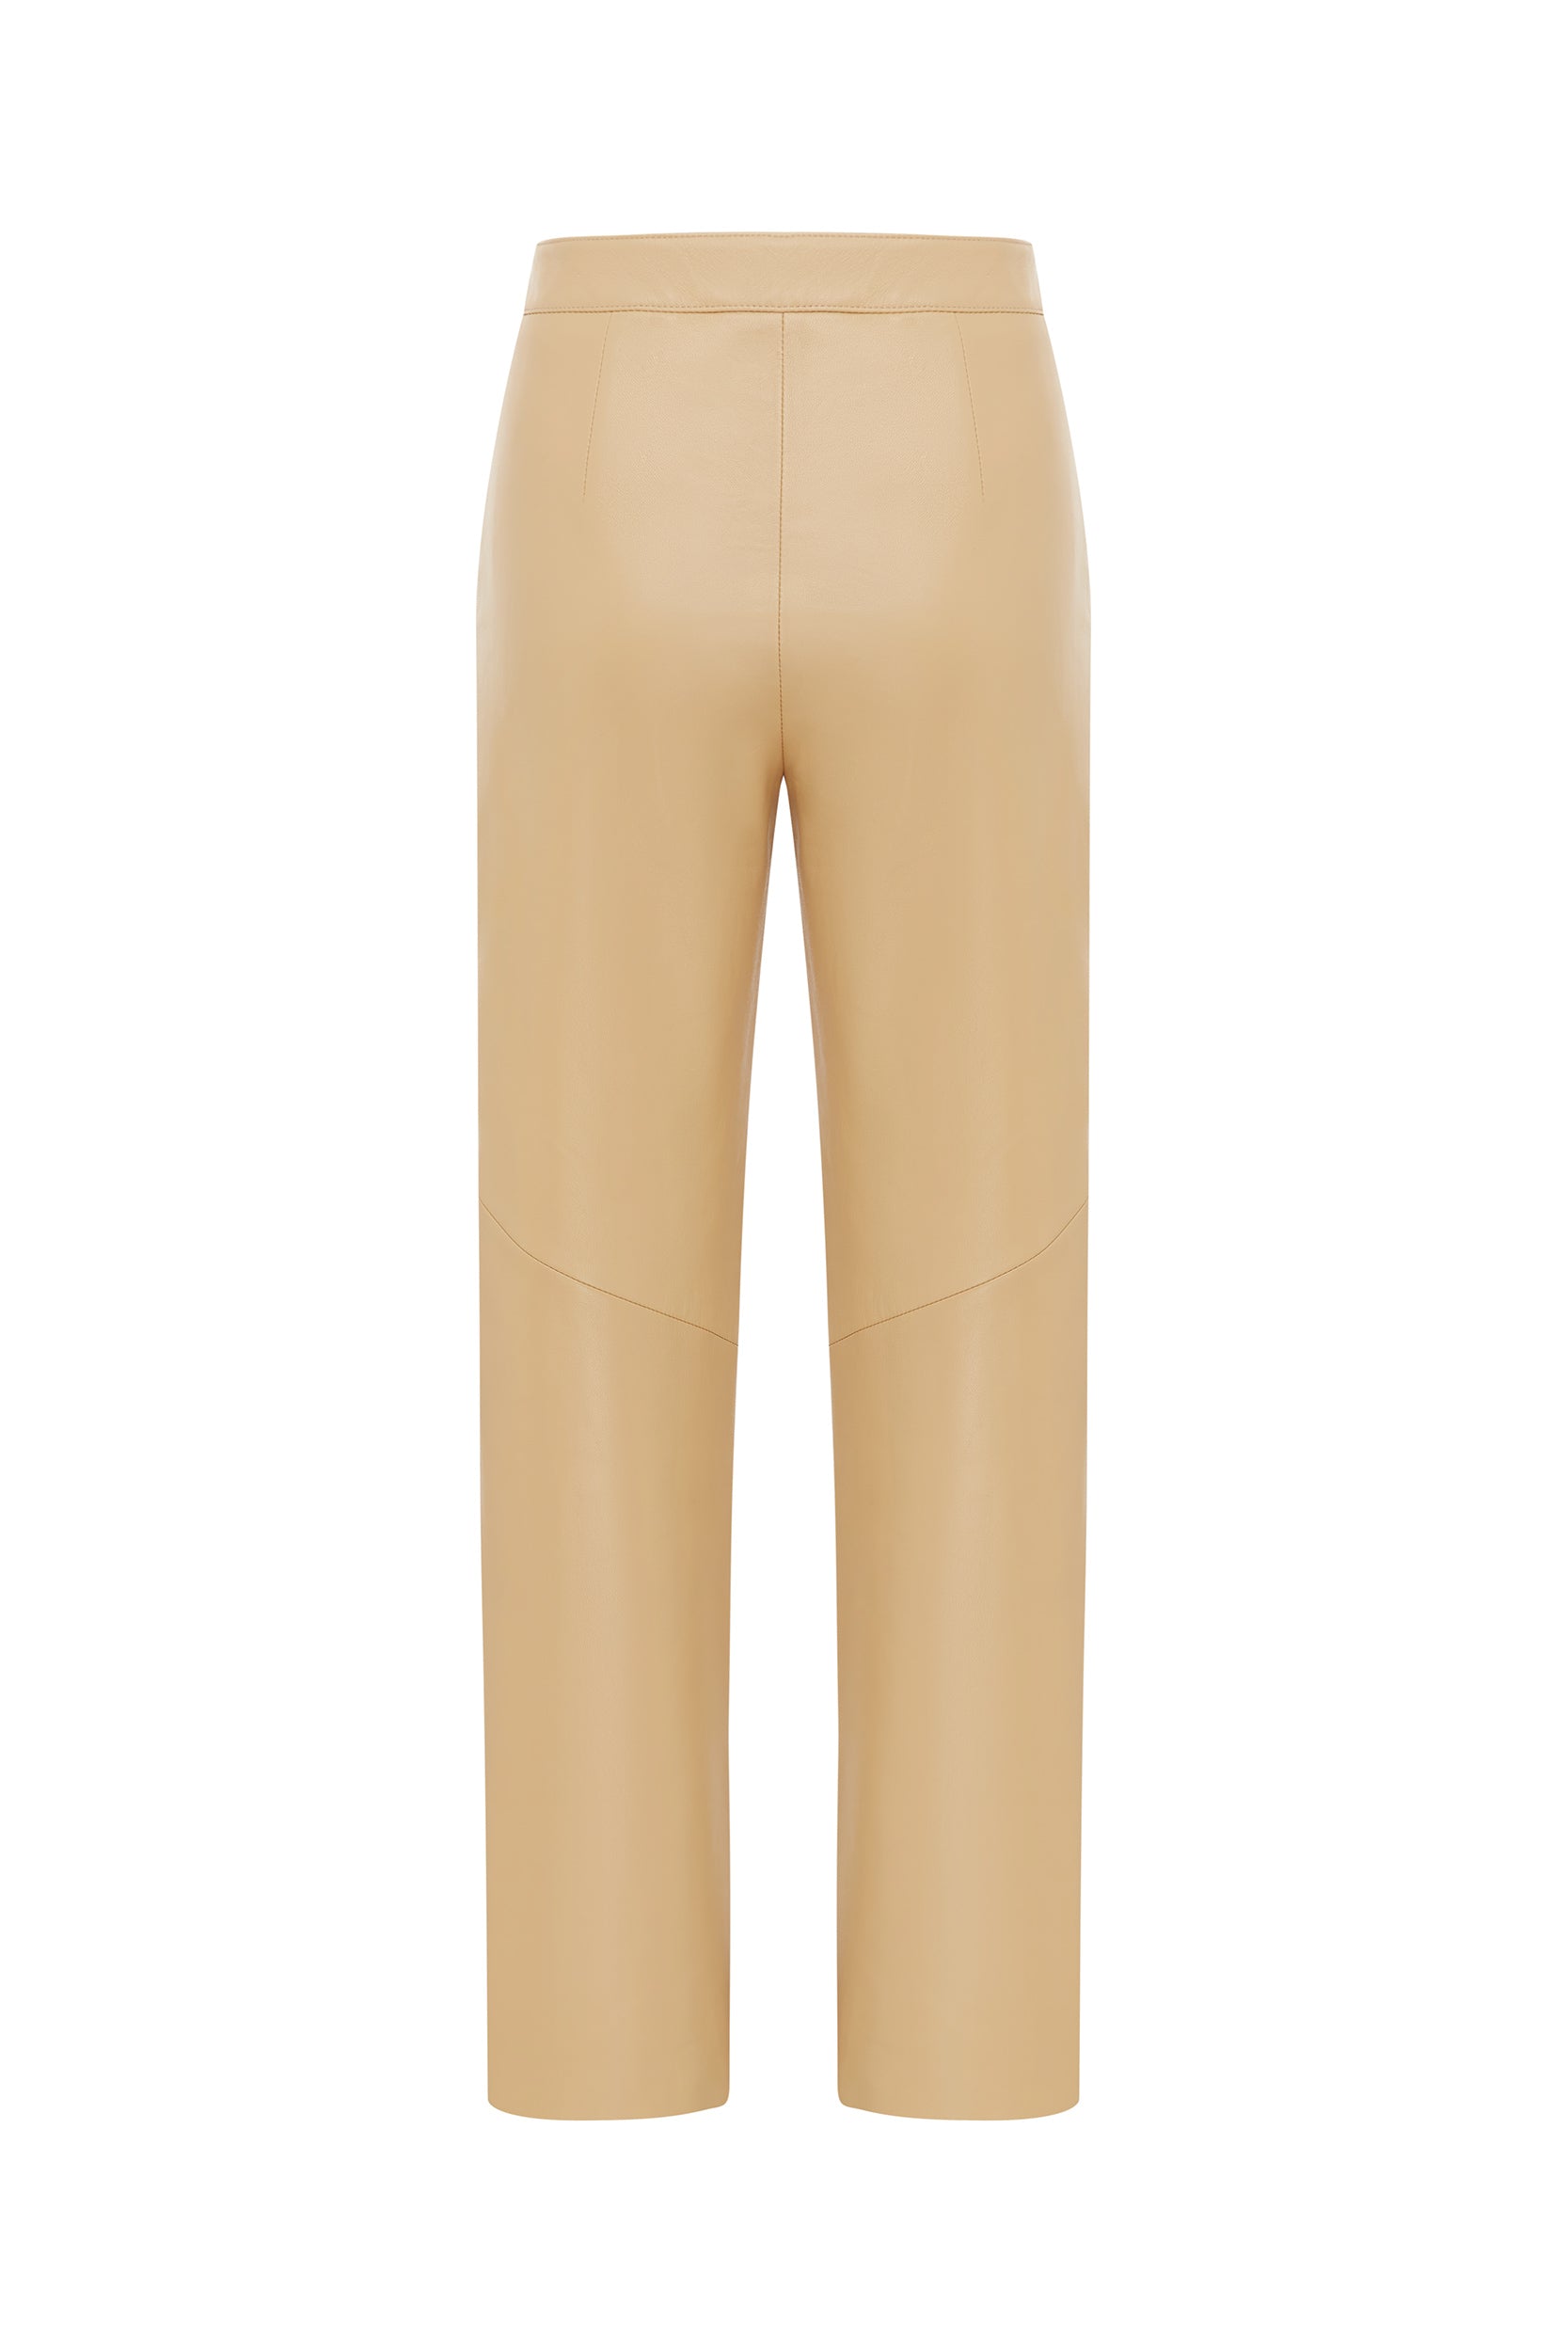 Luxe Italian Leather Pant in Butterscotch